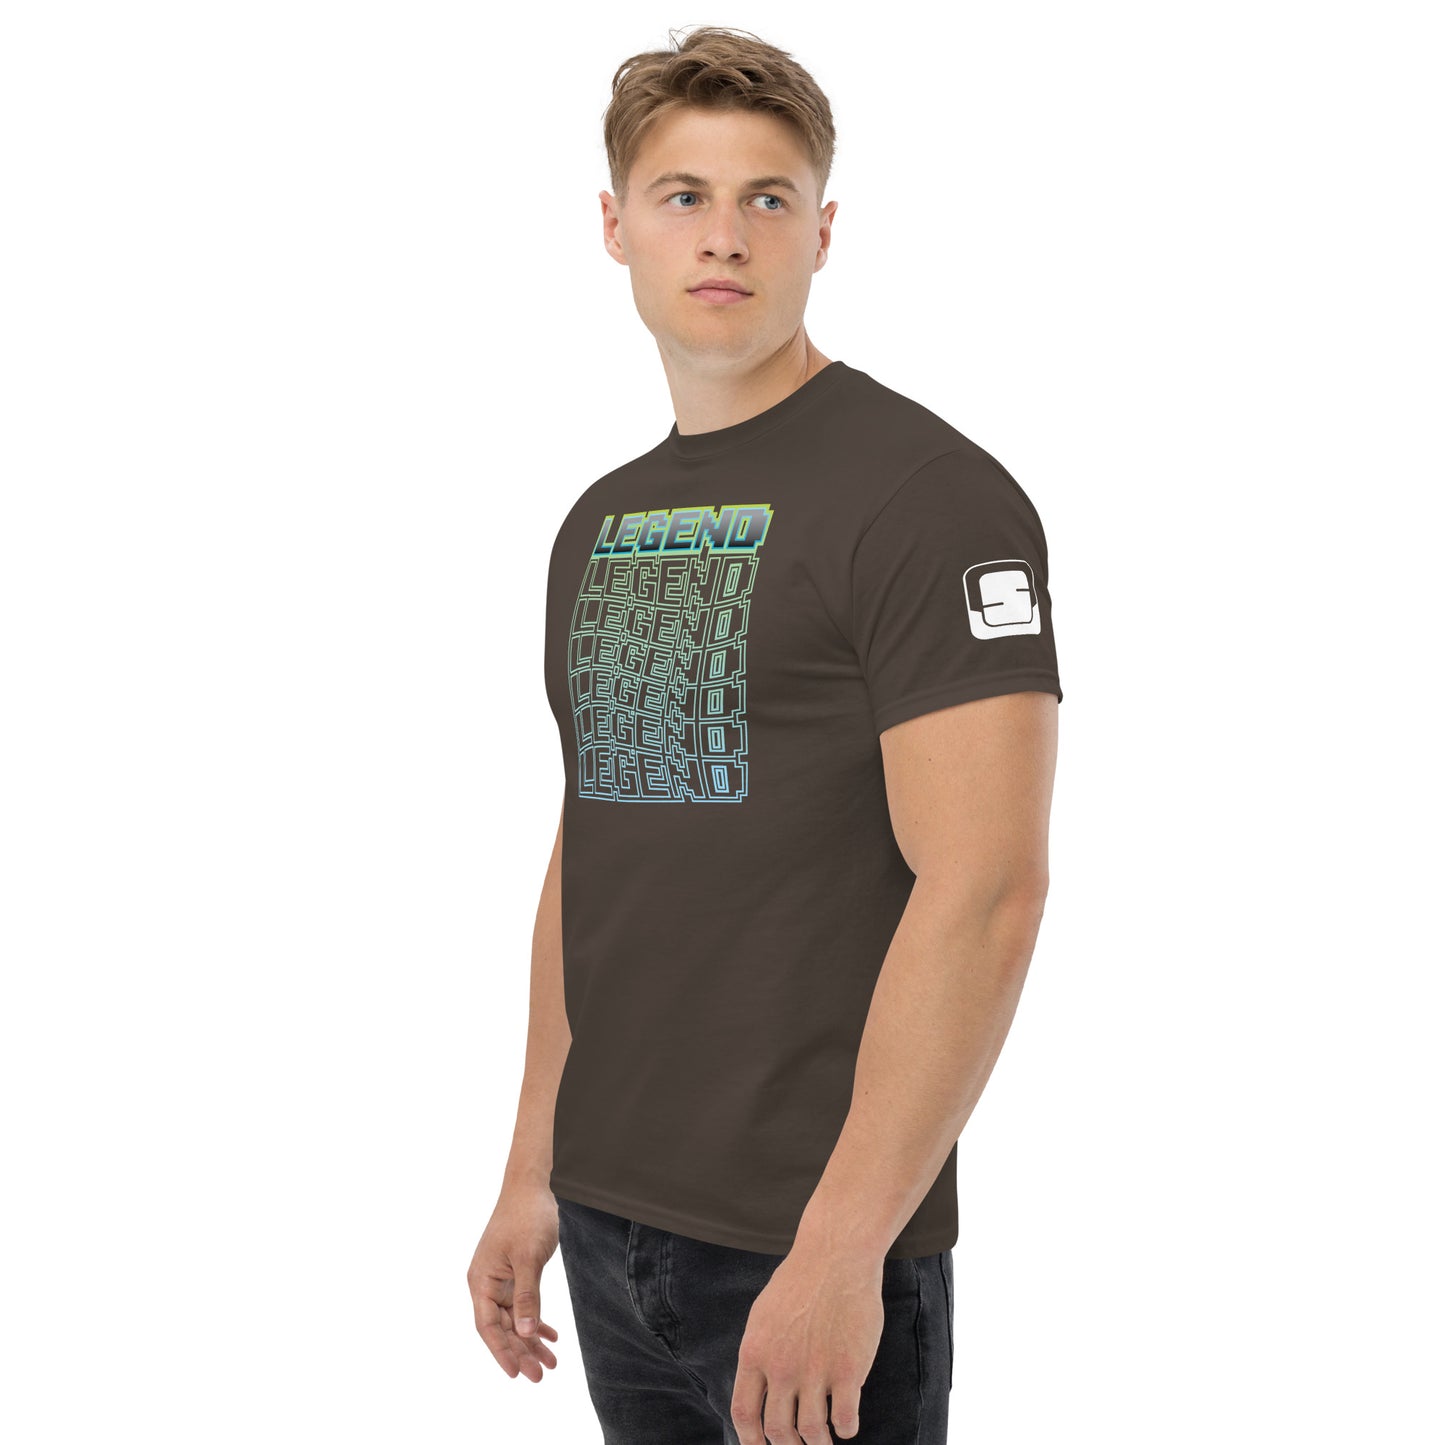 A man with a neutral expression wearing a dark brown t-shirt with a stylized graphic that reads 'LEGEND' repeatedly in a green-to-blue gradient, creating a 3D cube effect, with a logo patch on the sleeve, standing against a white background.